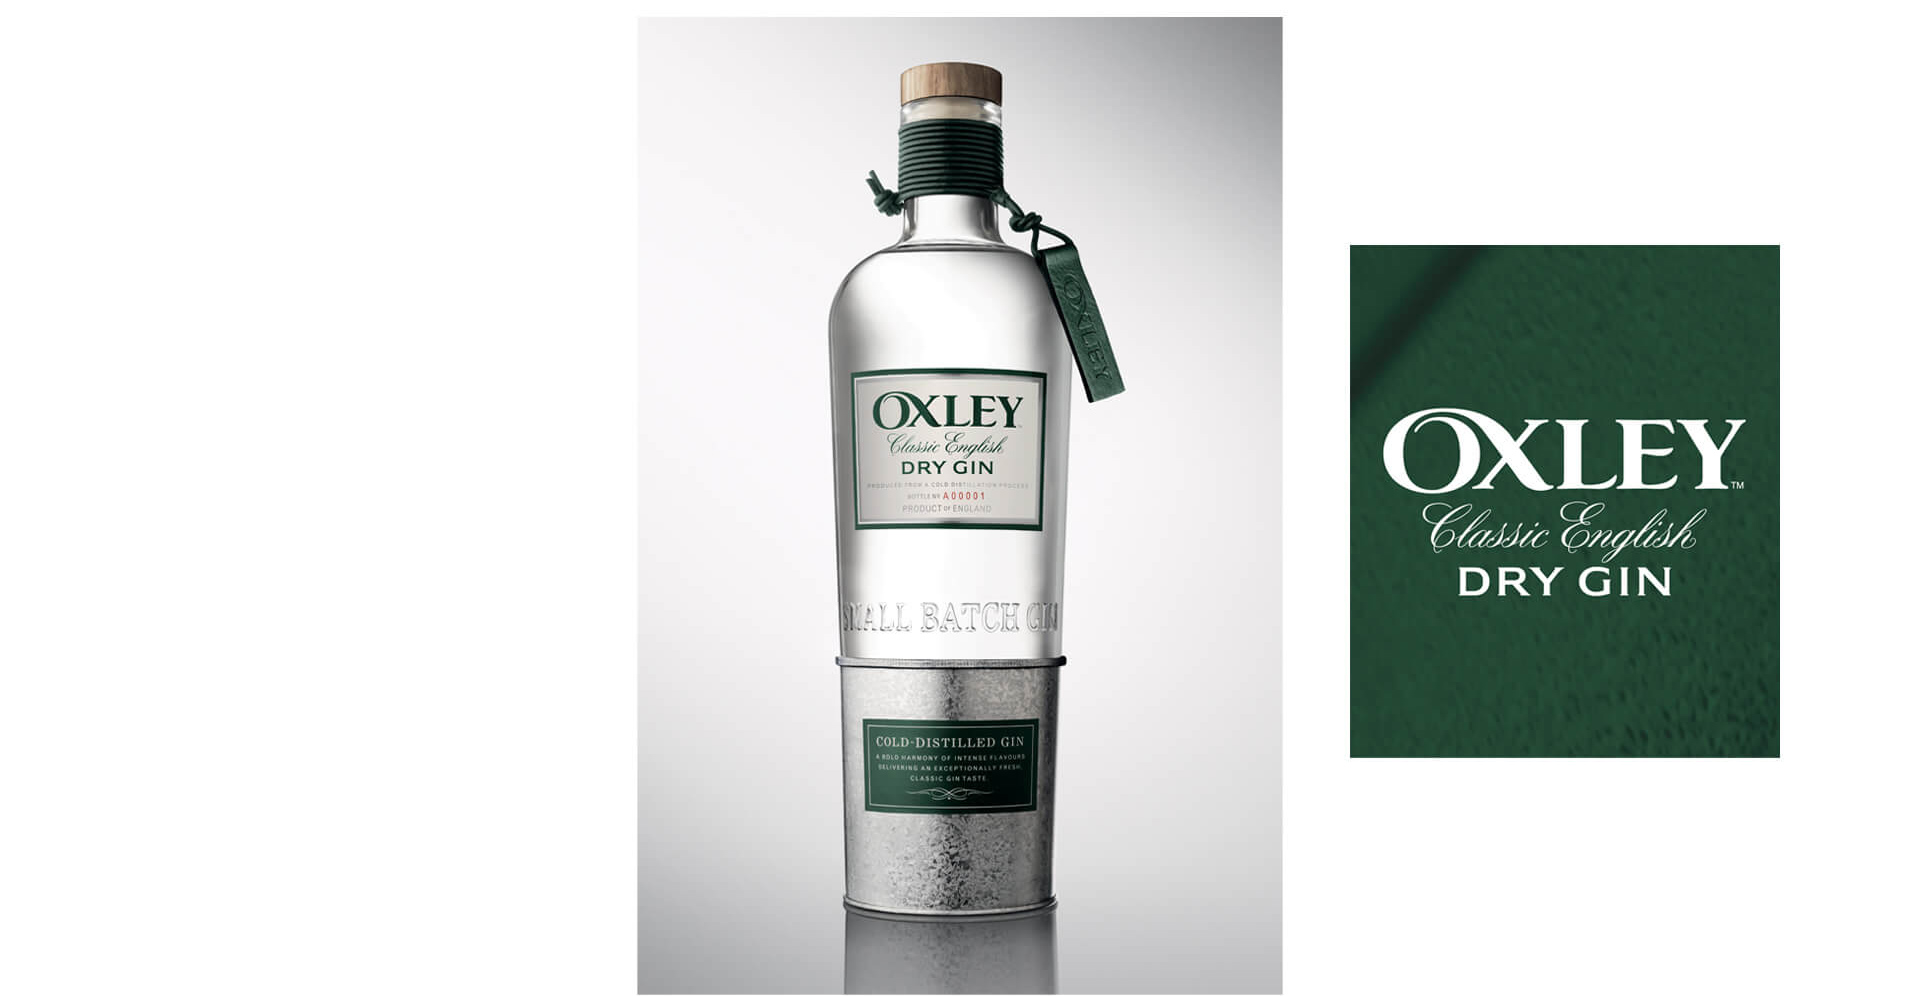 Oxley Gin brand identity and photographic promotion campaign travel retail for Bacardi Global Travel Retail